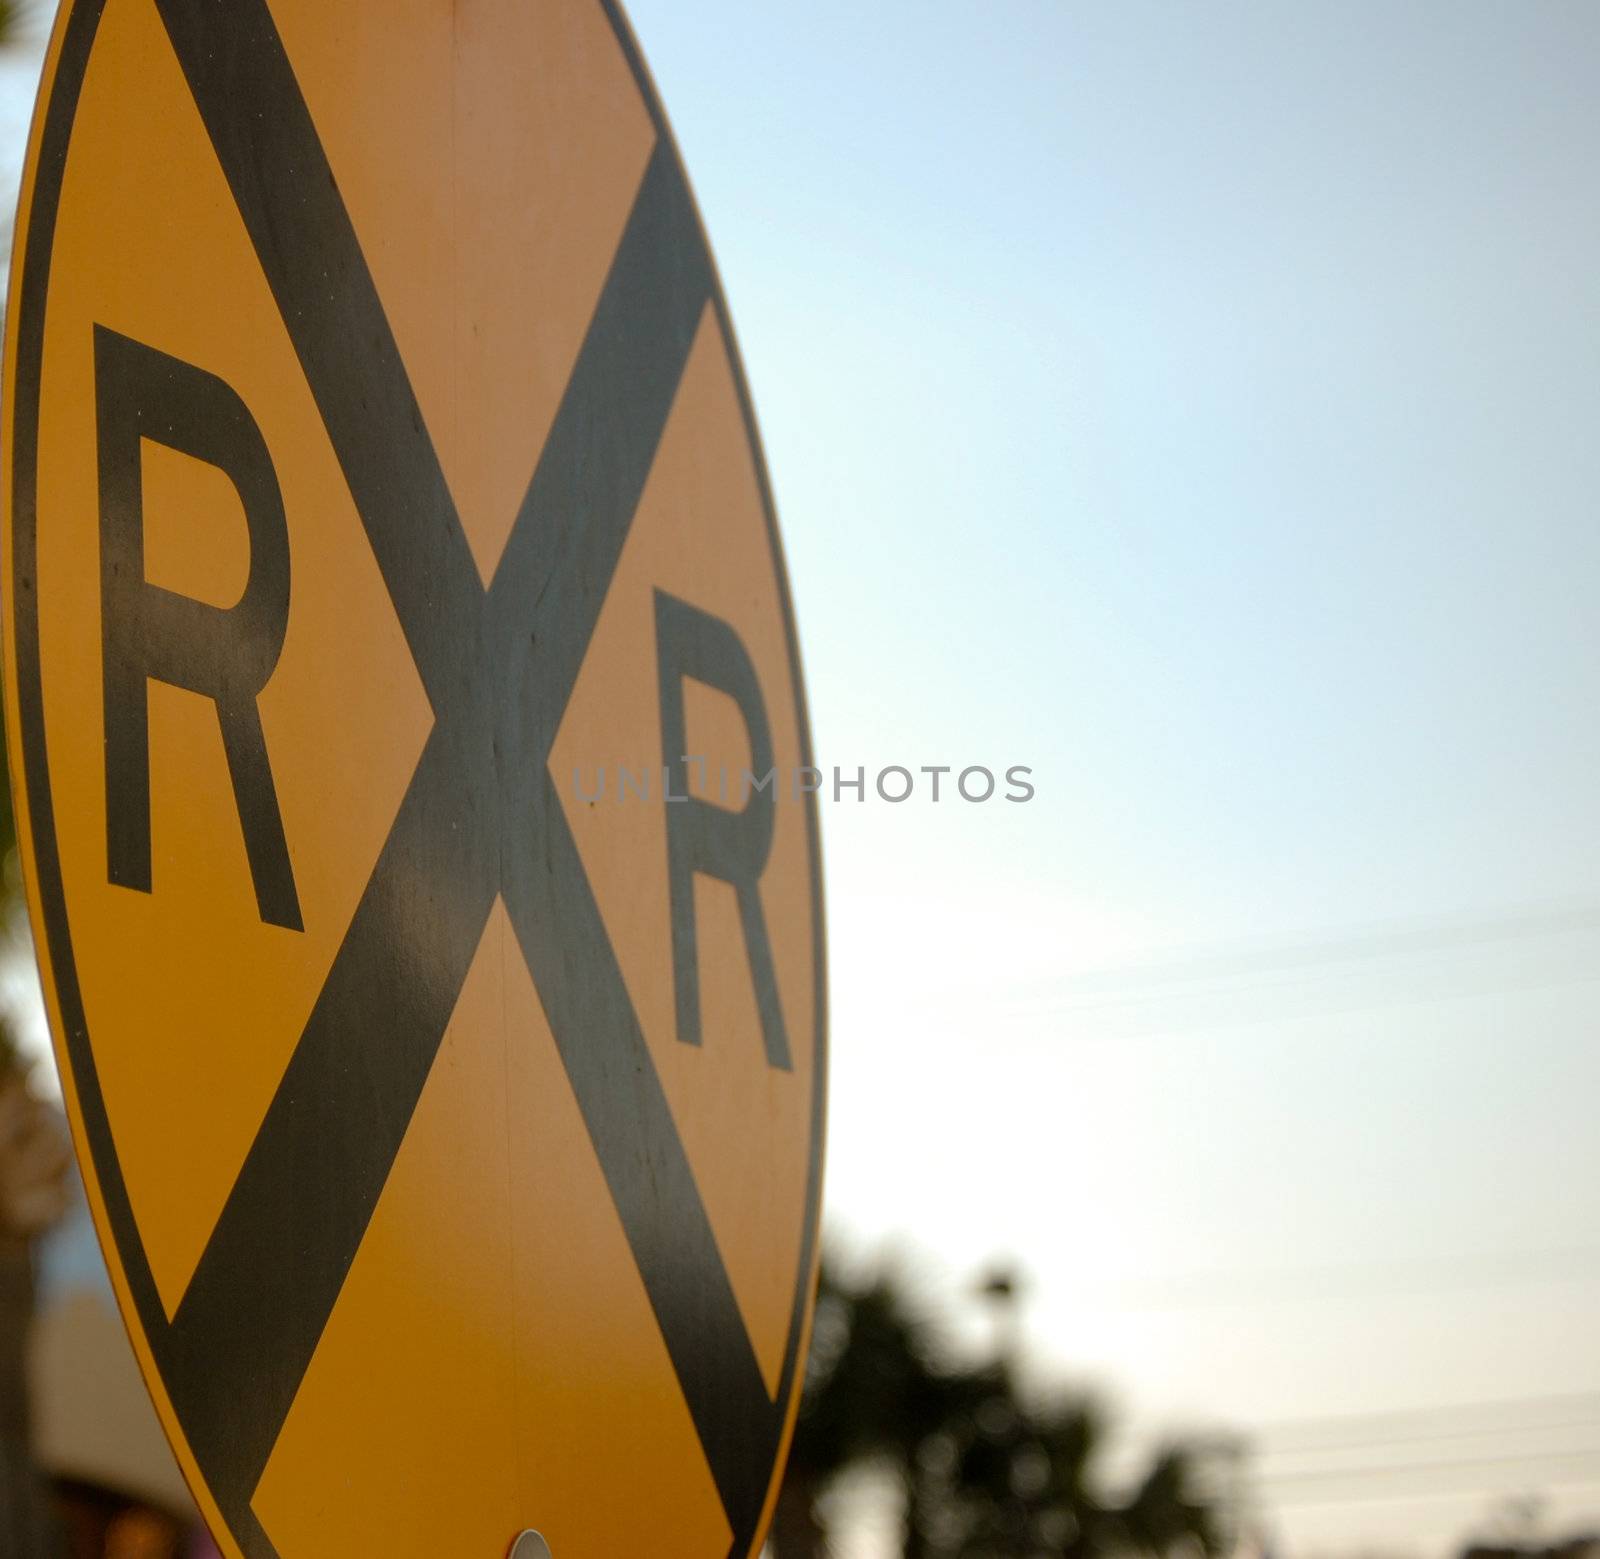 RxR Background by RefocusPhoto